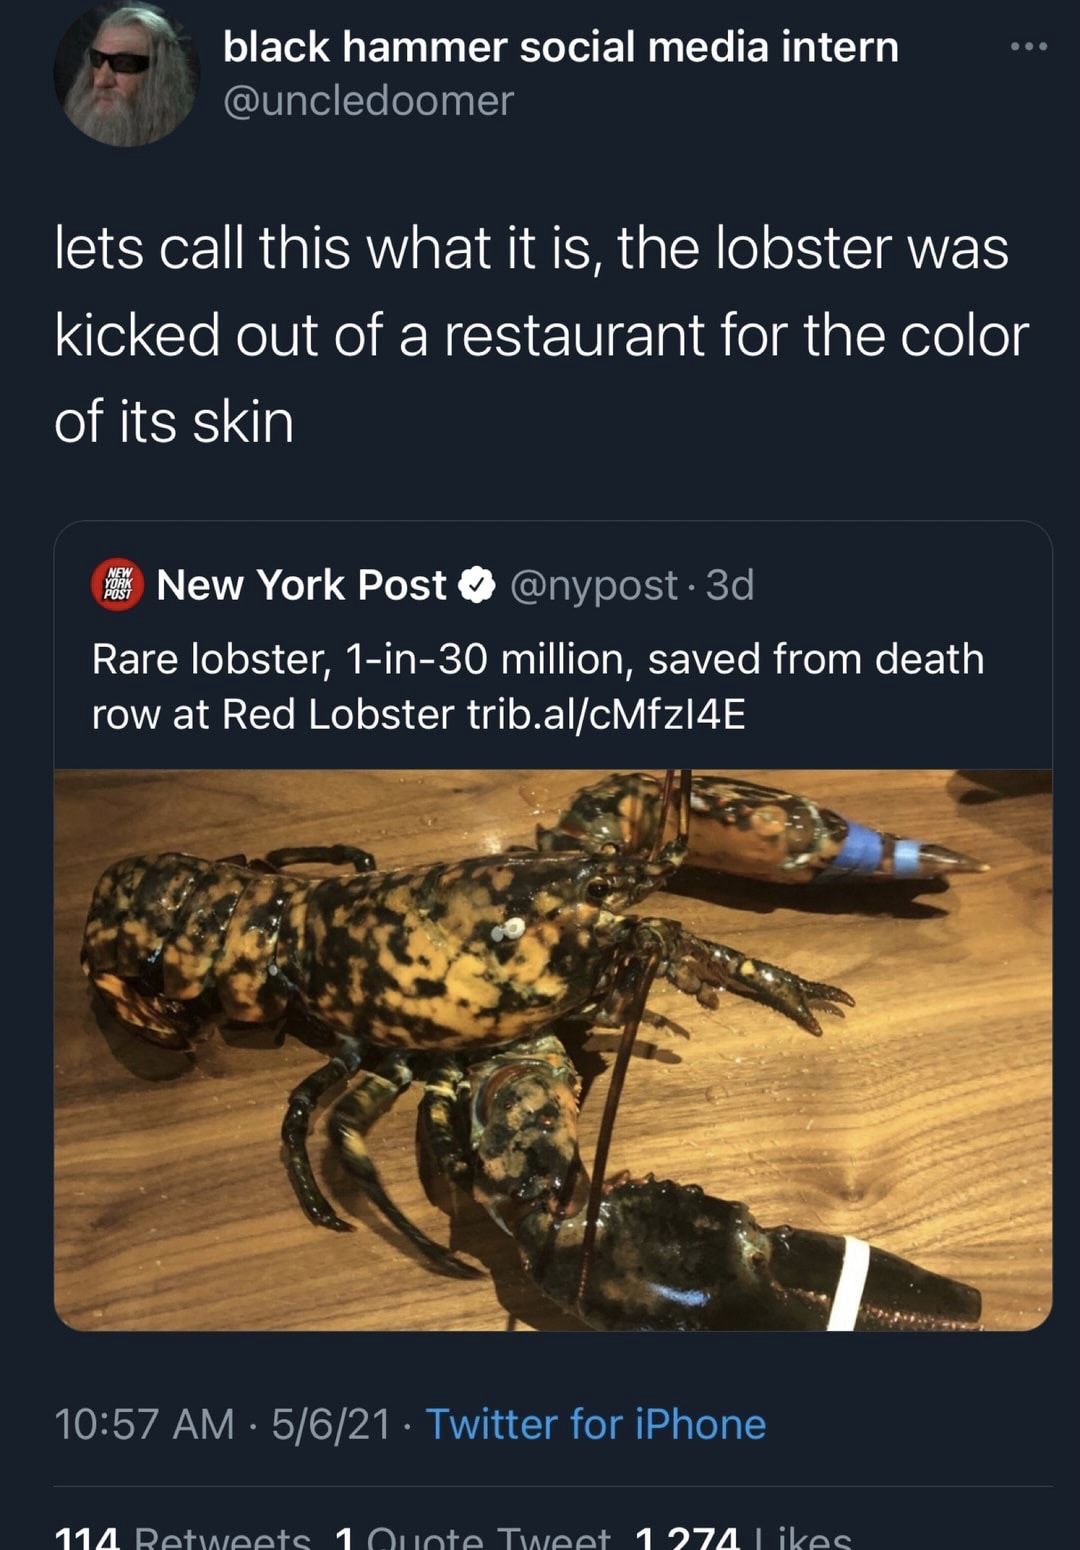 JUSTICE FOR LOBSTER